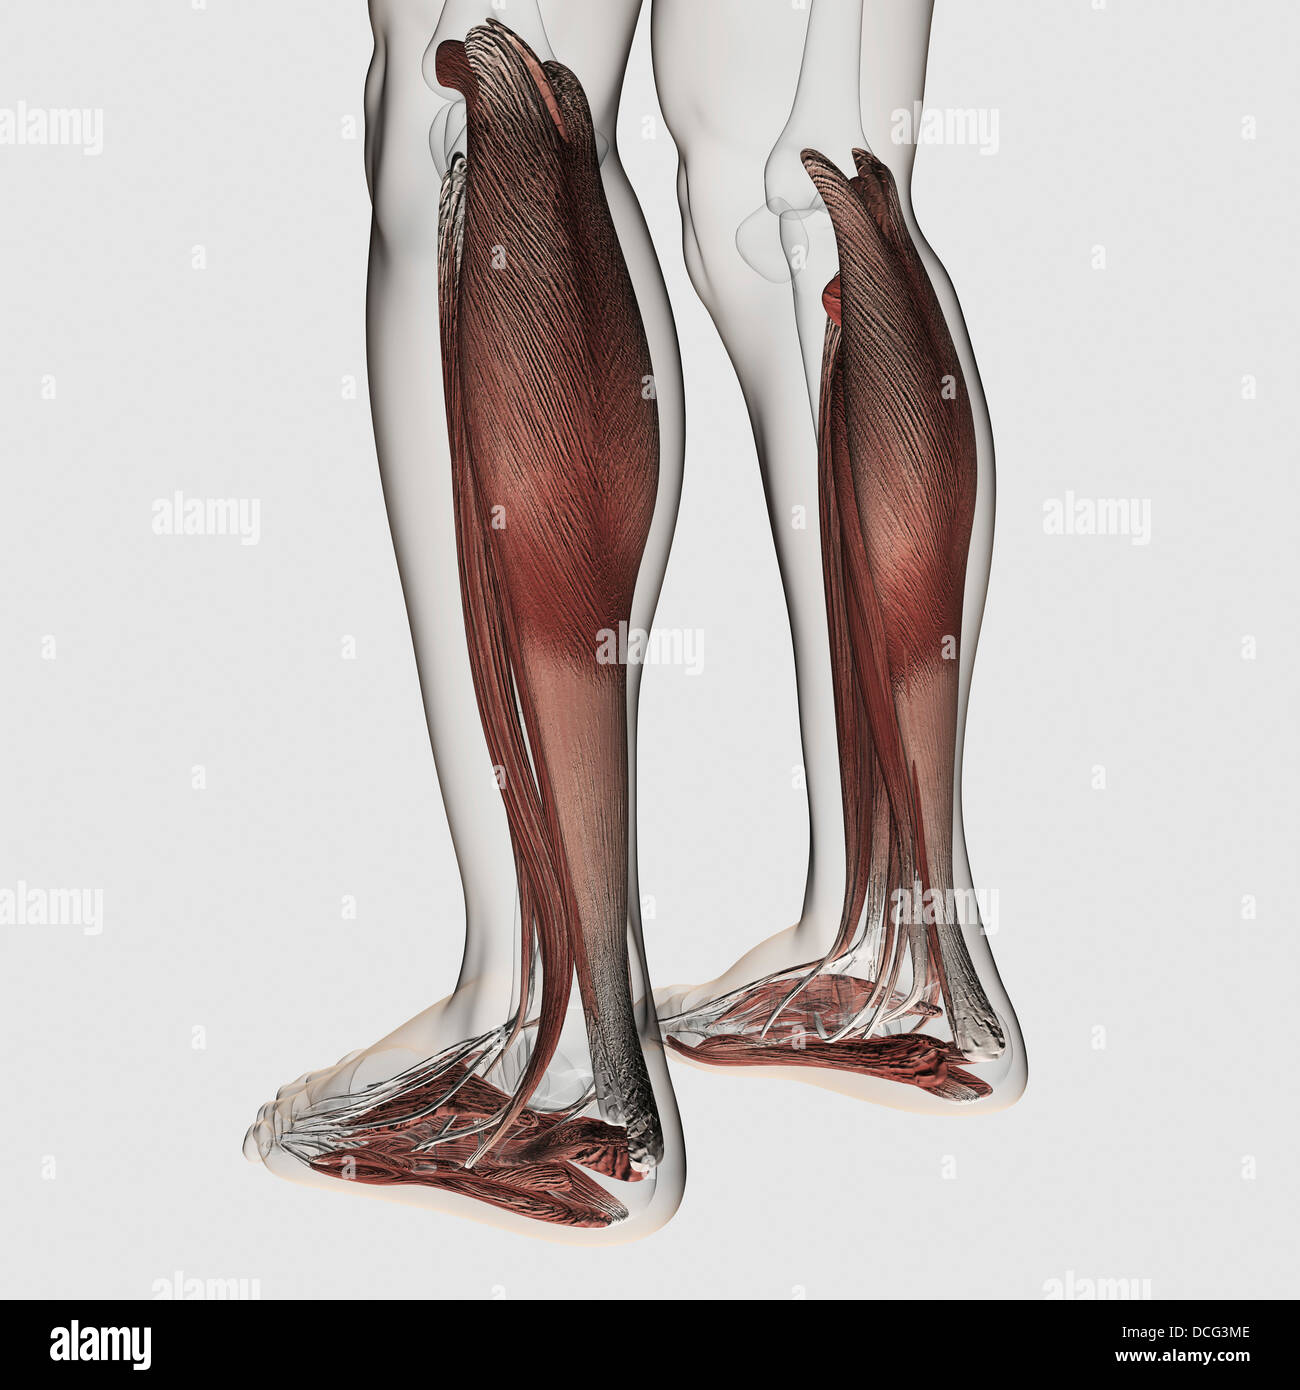 Male muscle anatomy of the human legs, anterior view. Stock Photo